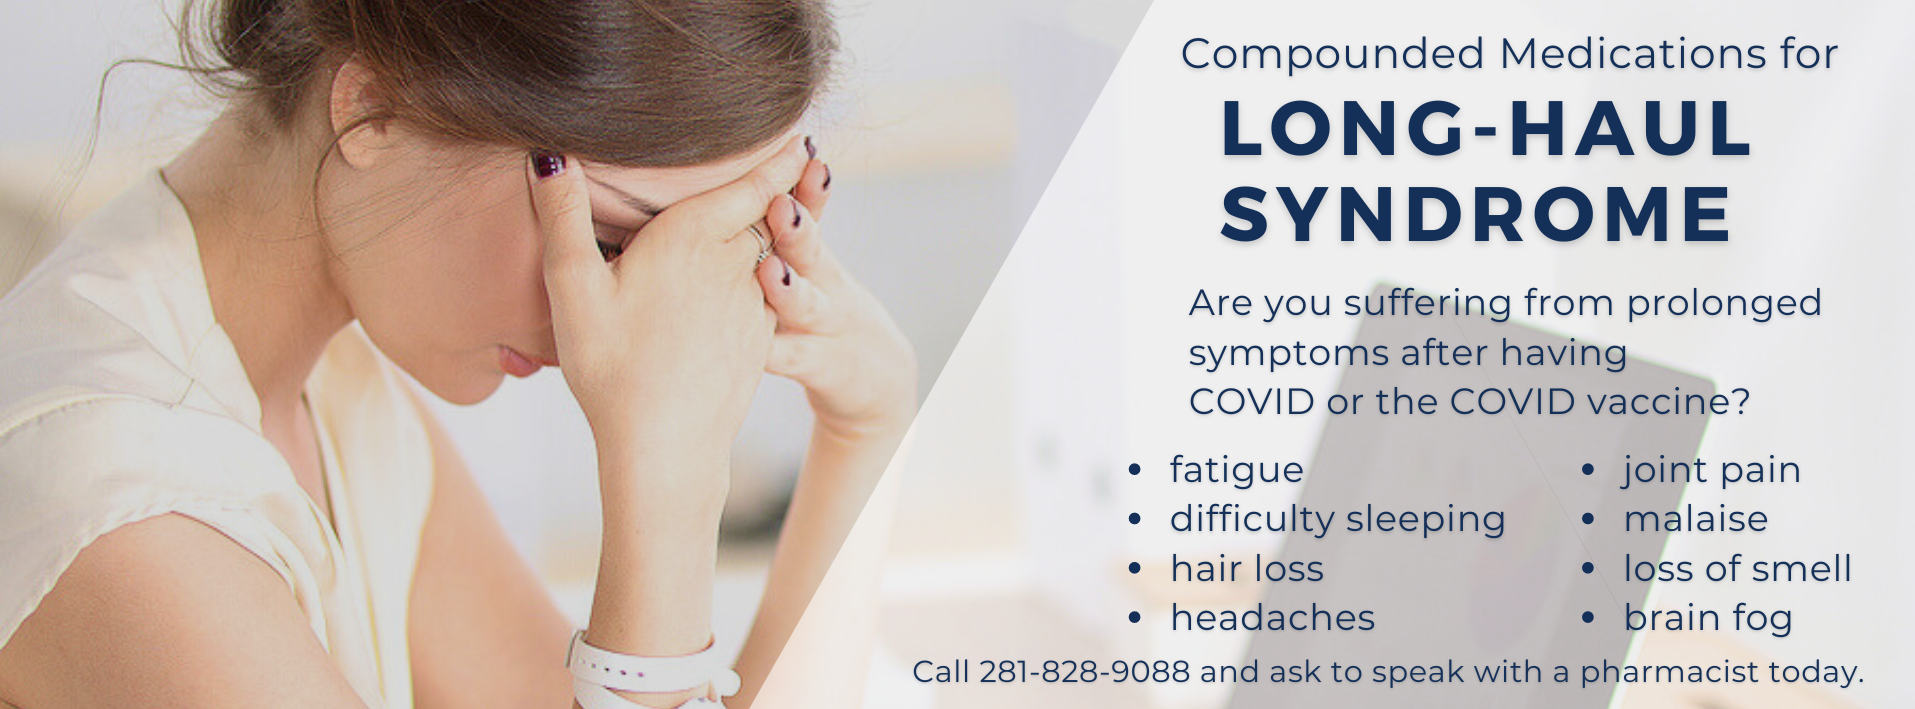 Compounds for Long-Haul Syndrome Banner